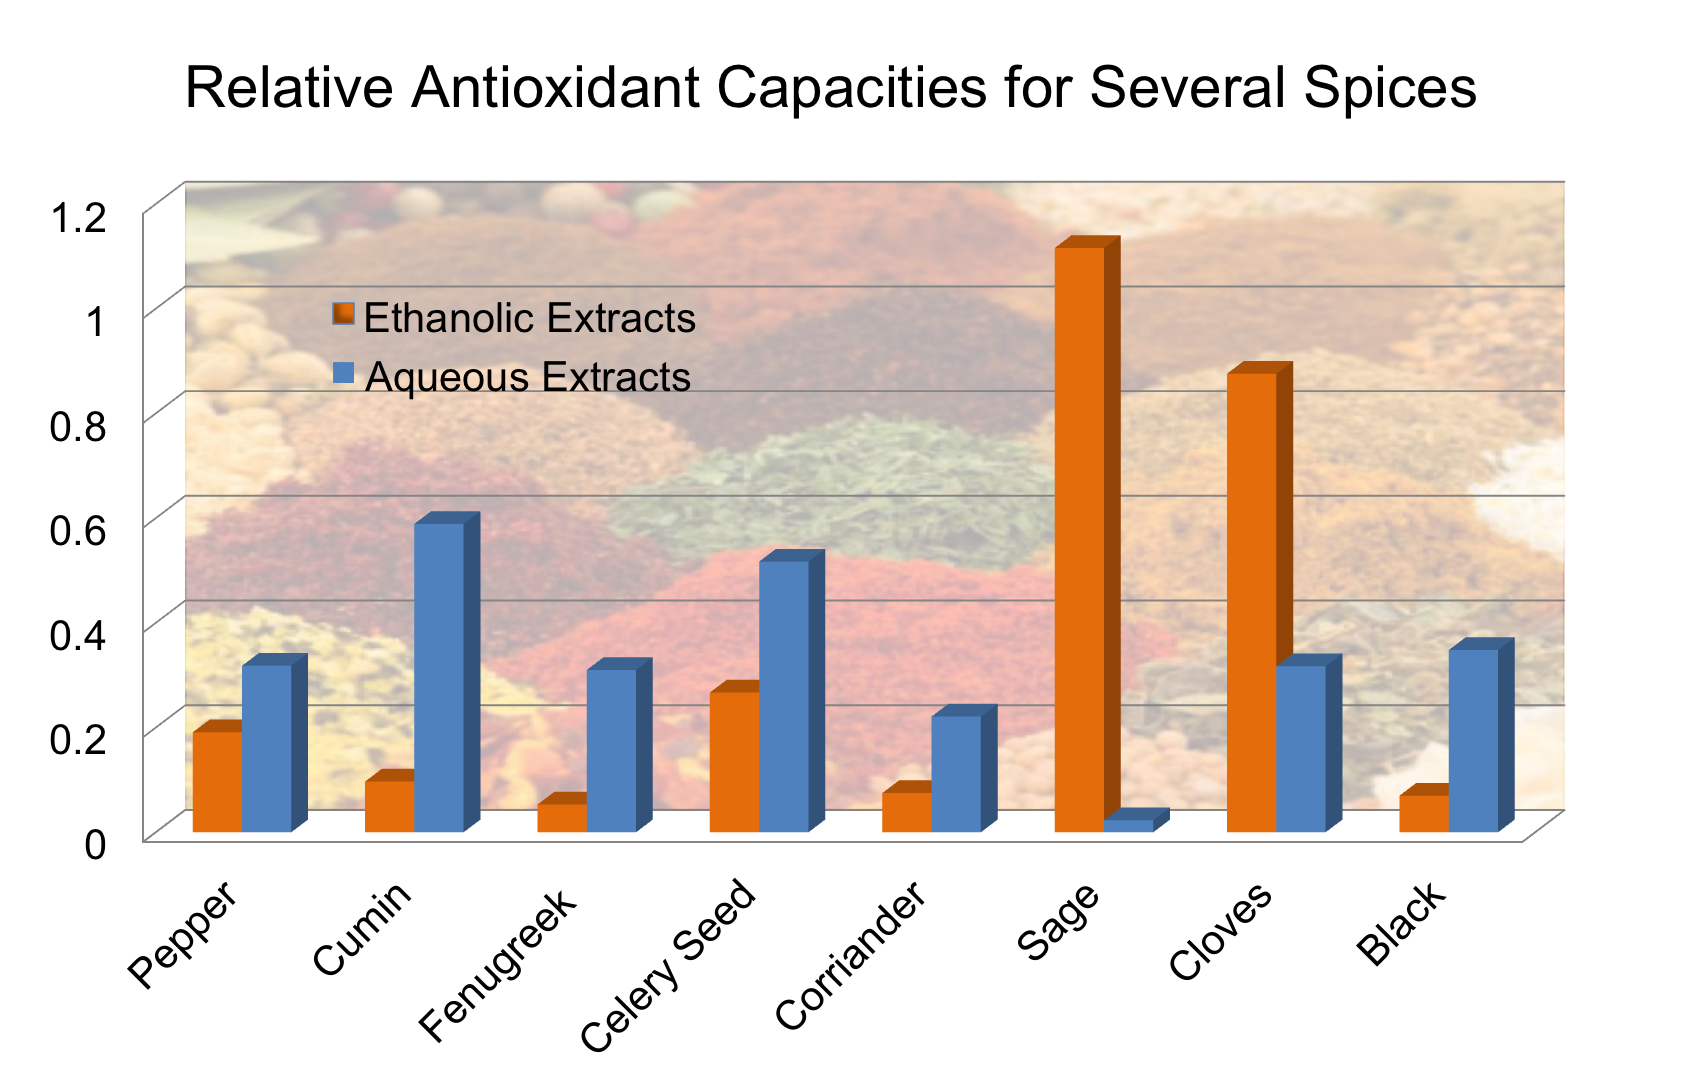 Relative Antioxidant Power of Spices